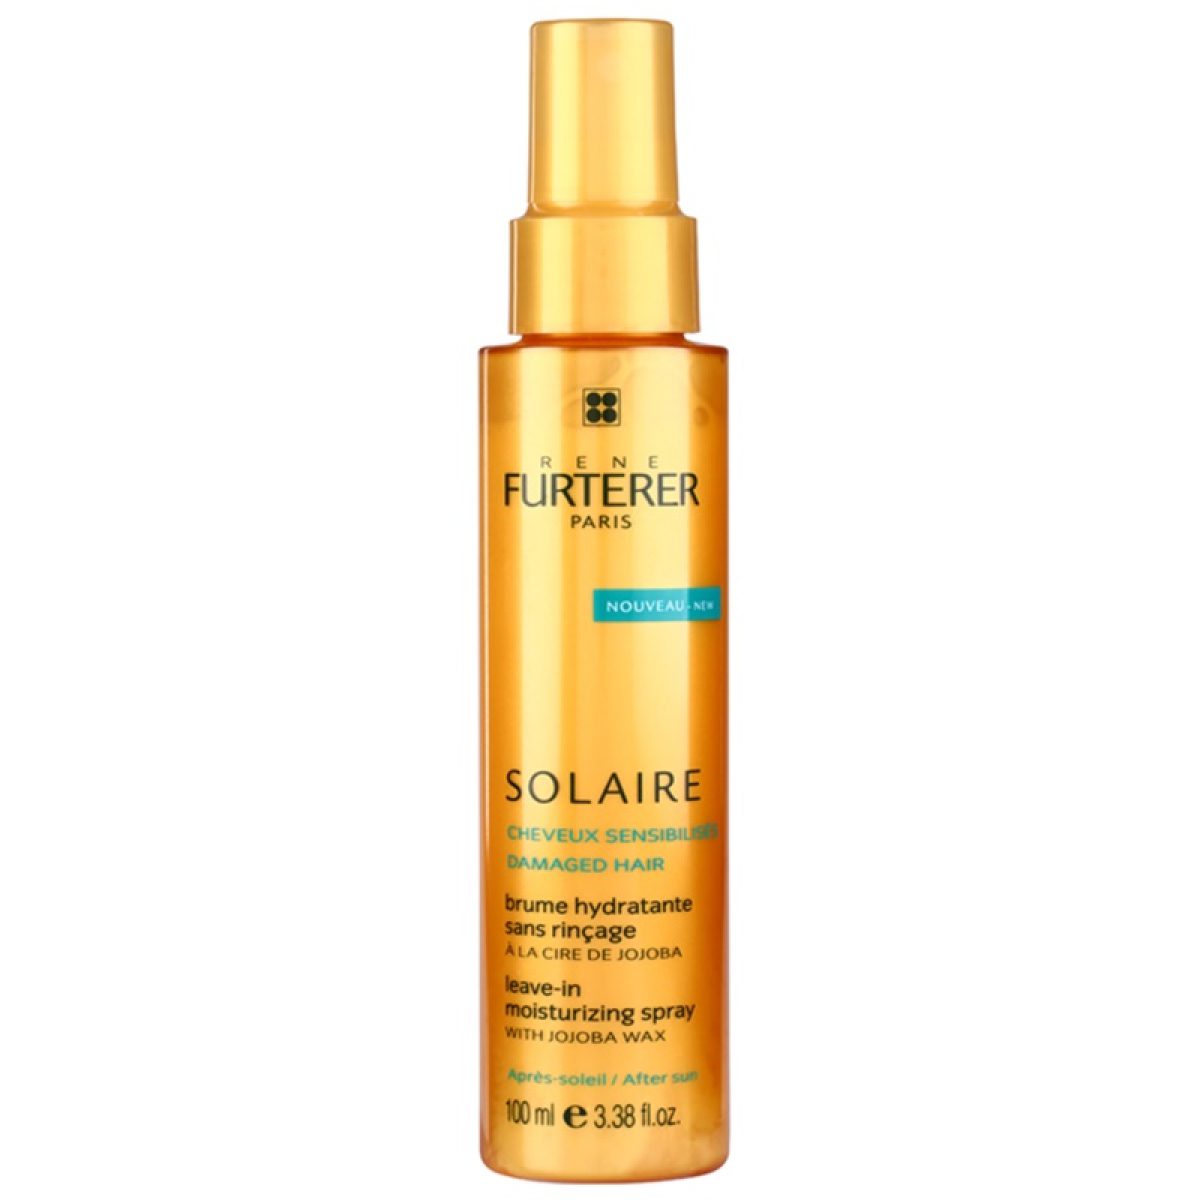 Solaire  Moustirizing Spray